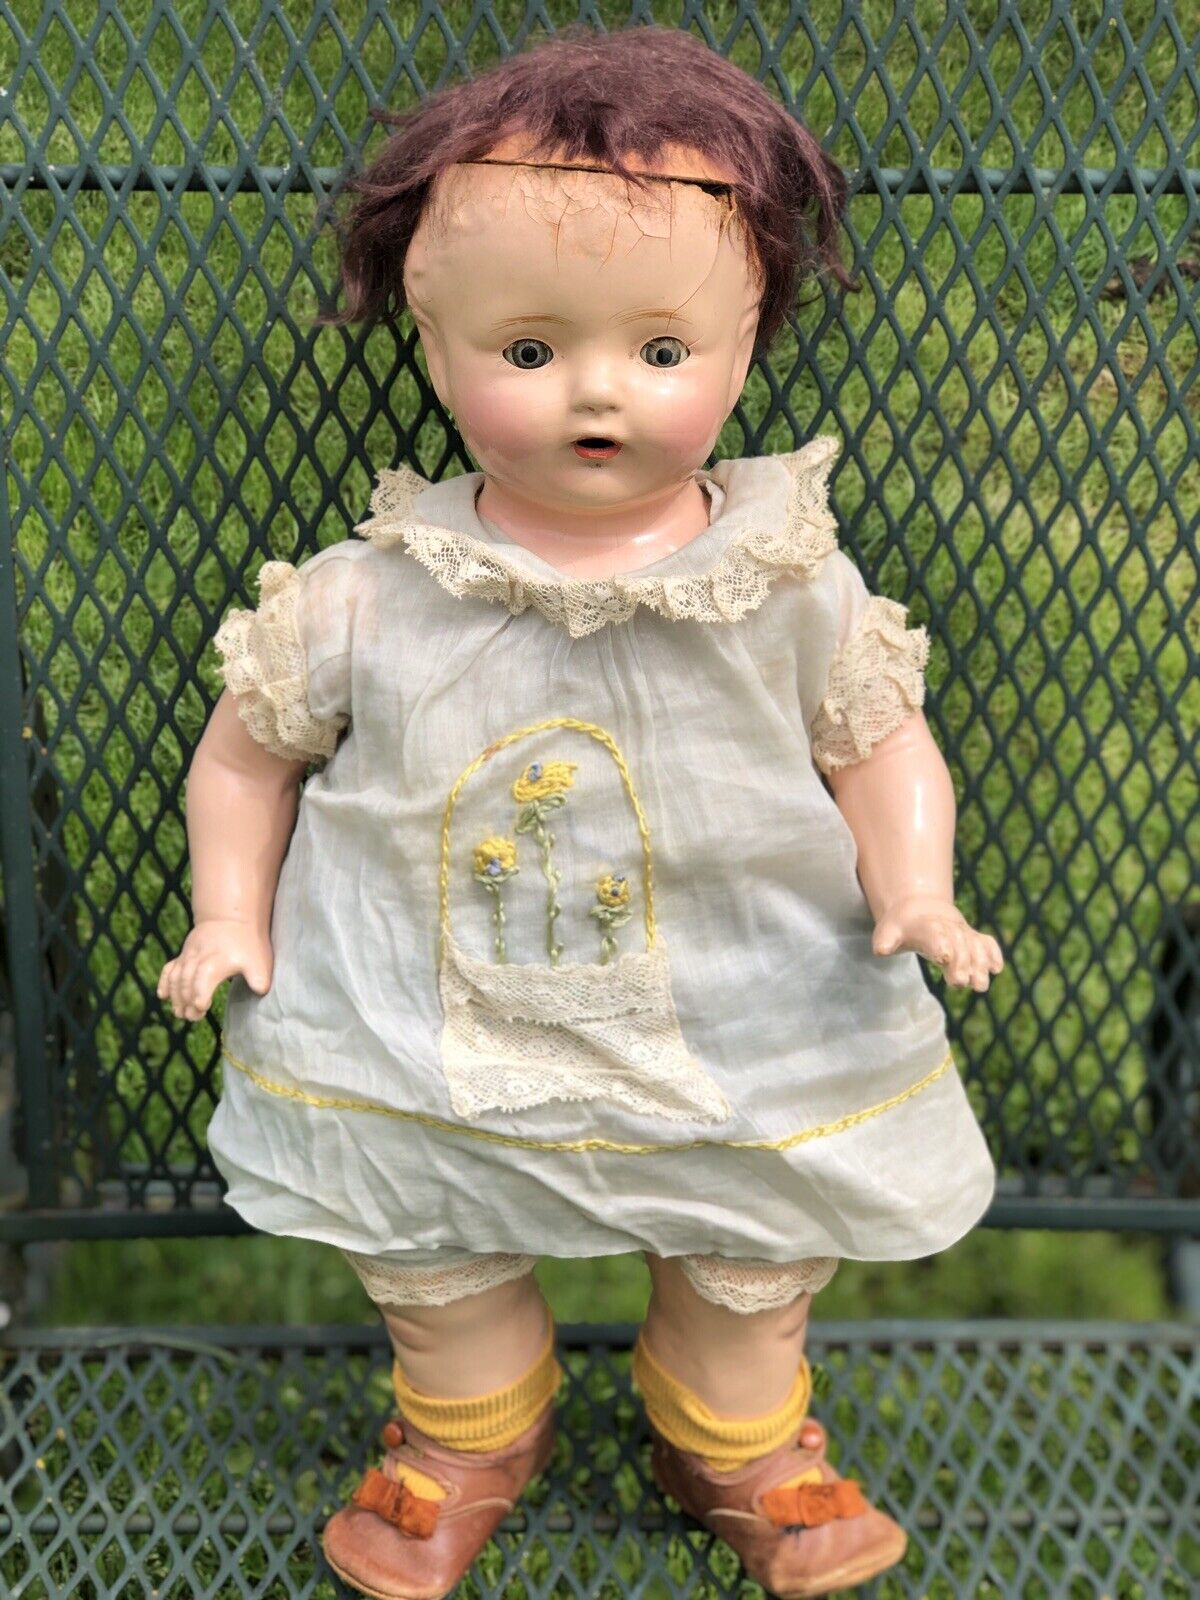 Antique American Composition Crying Baby Doll 1920 Collectable